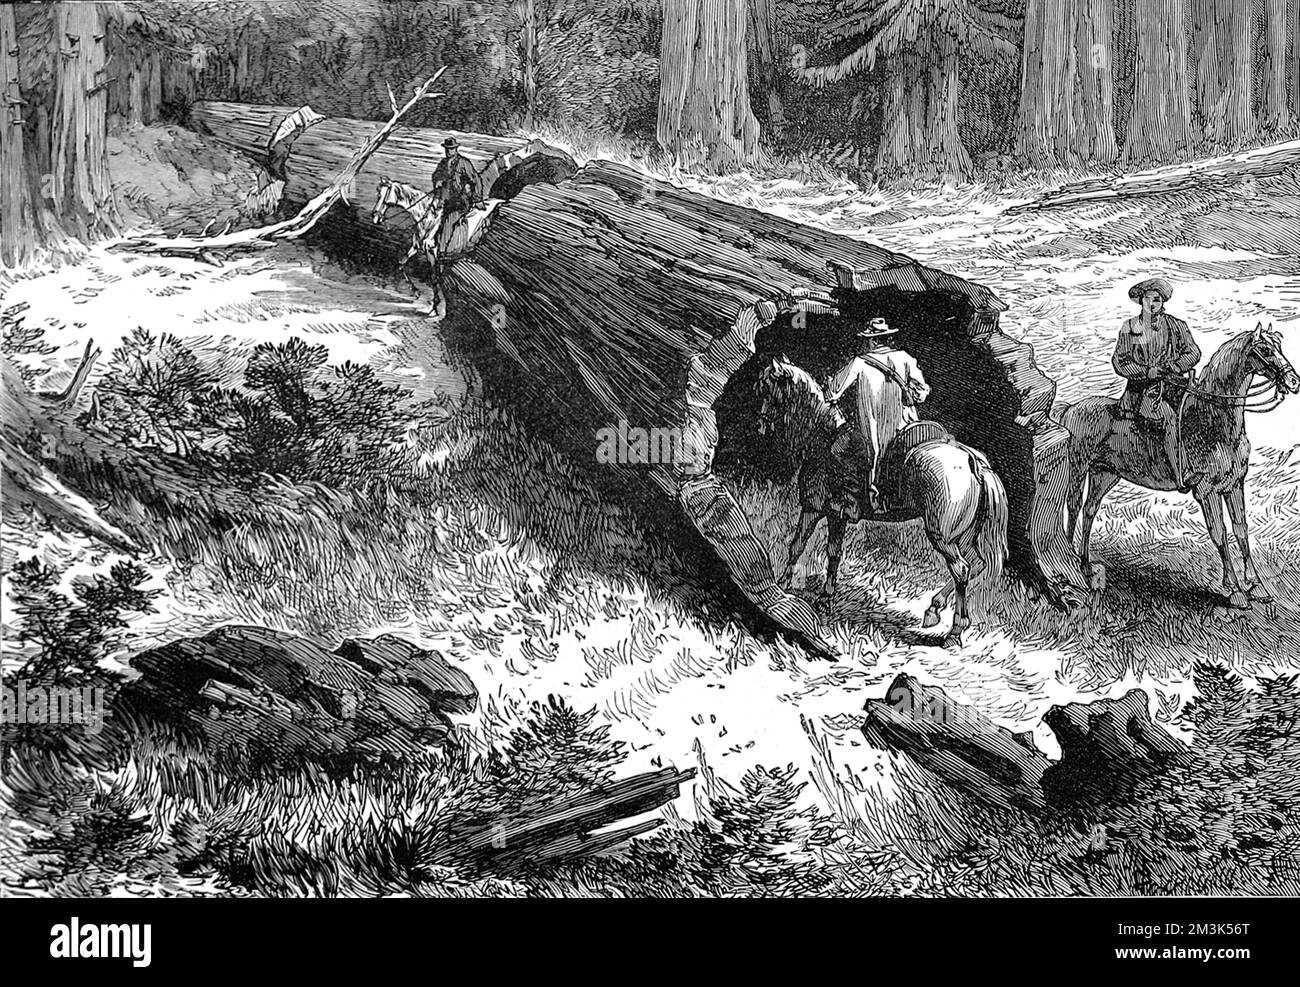 Three men on horseback next to a fallen giant sequoia tree, California, 1877. This particular tree, it seems, was hollow enough for a man to ride through on horseback.  1877 Stock Photo